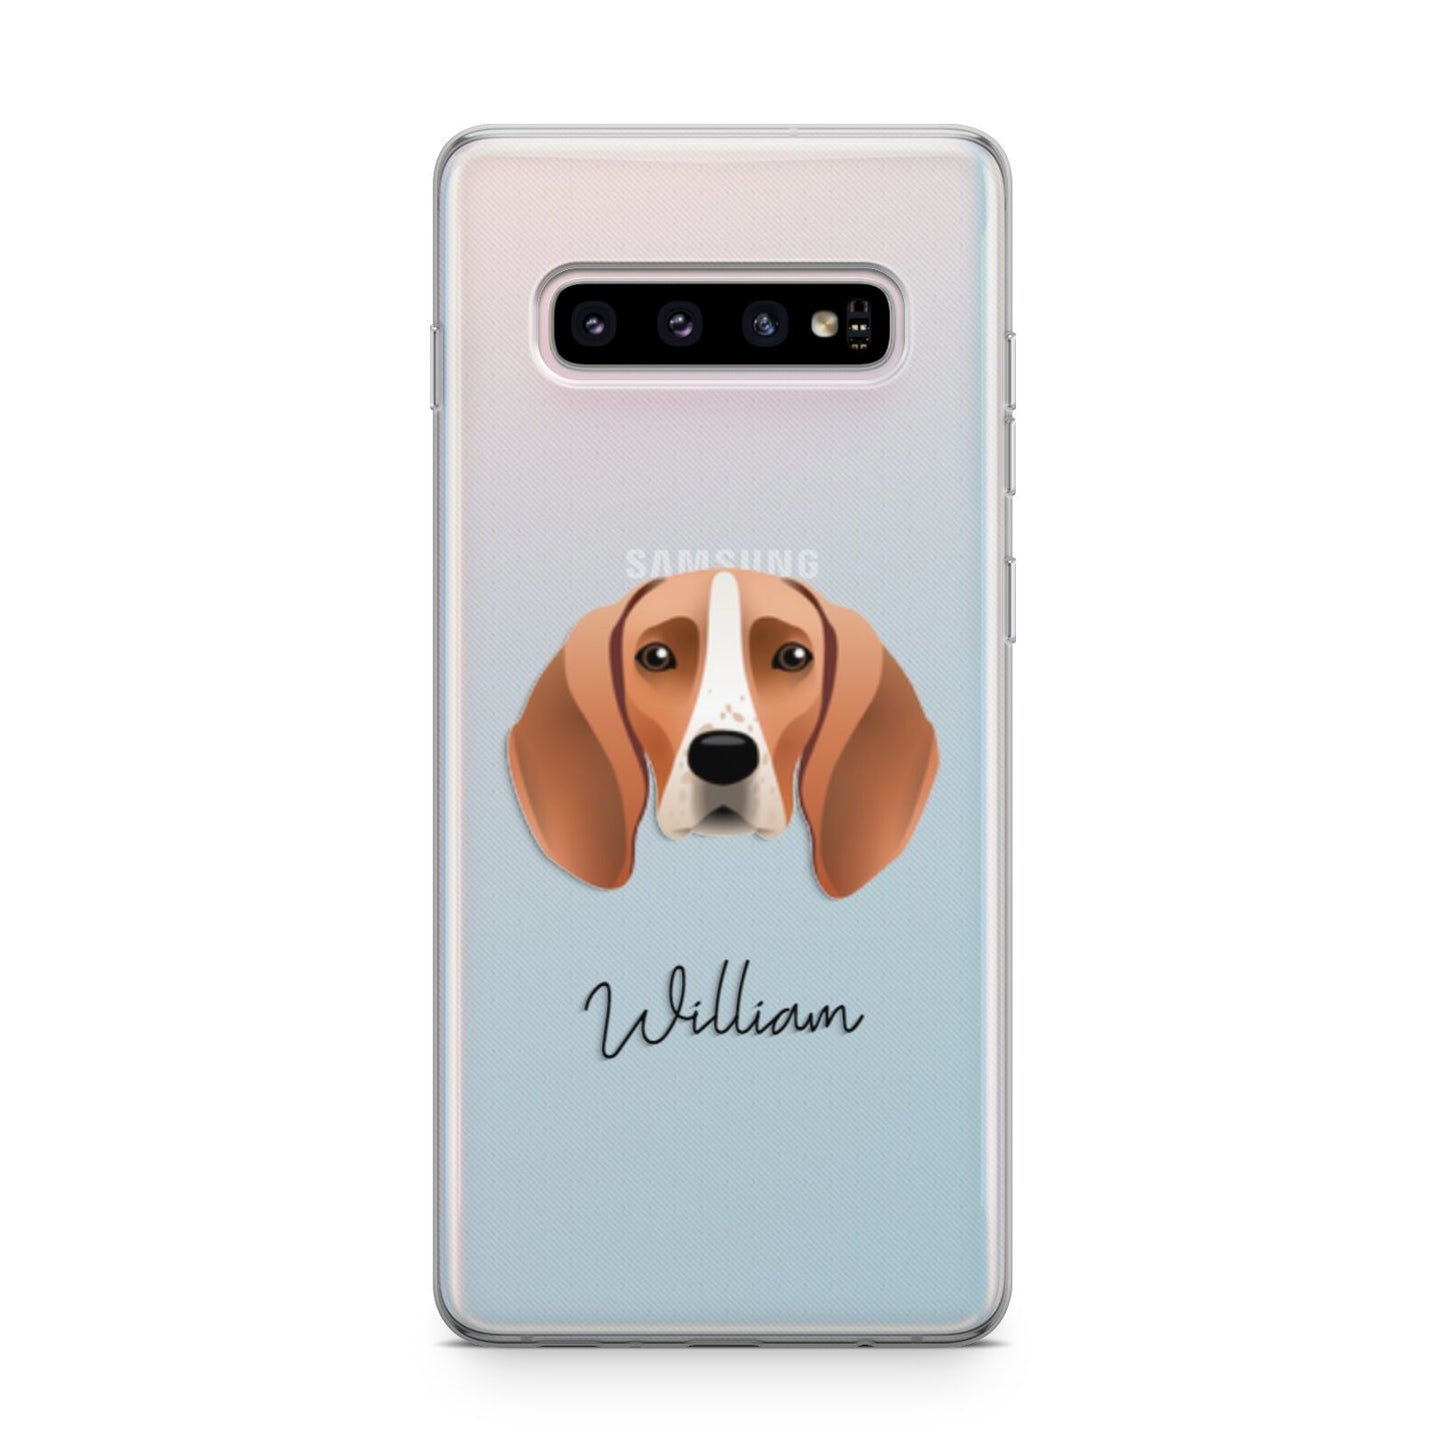 Foxhound Personalised Samsung Galaxy S10 Plus Case